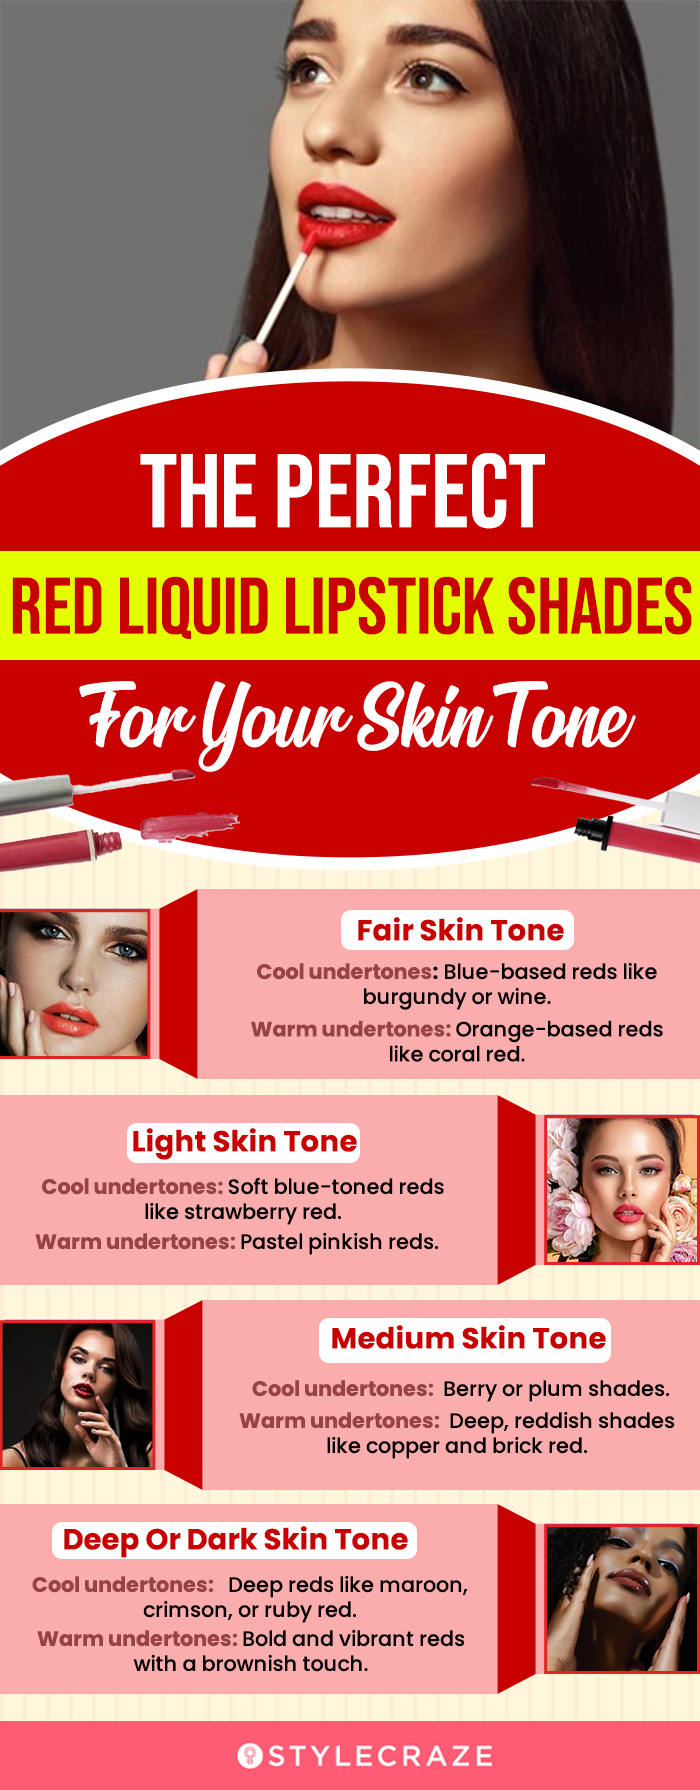 The Perfect Red Liquid Lipstick Shades For Your Skin Tone (infographic)